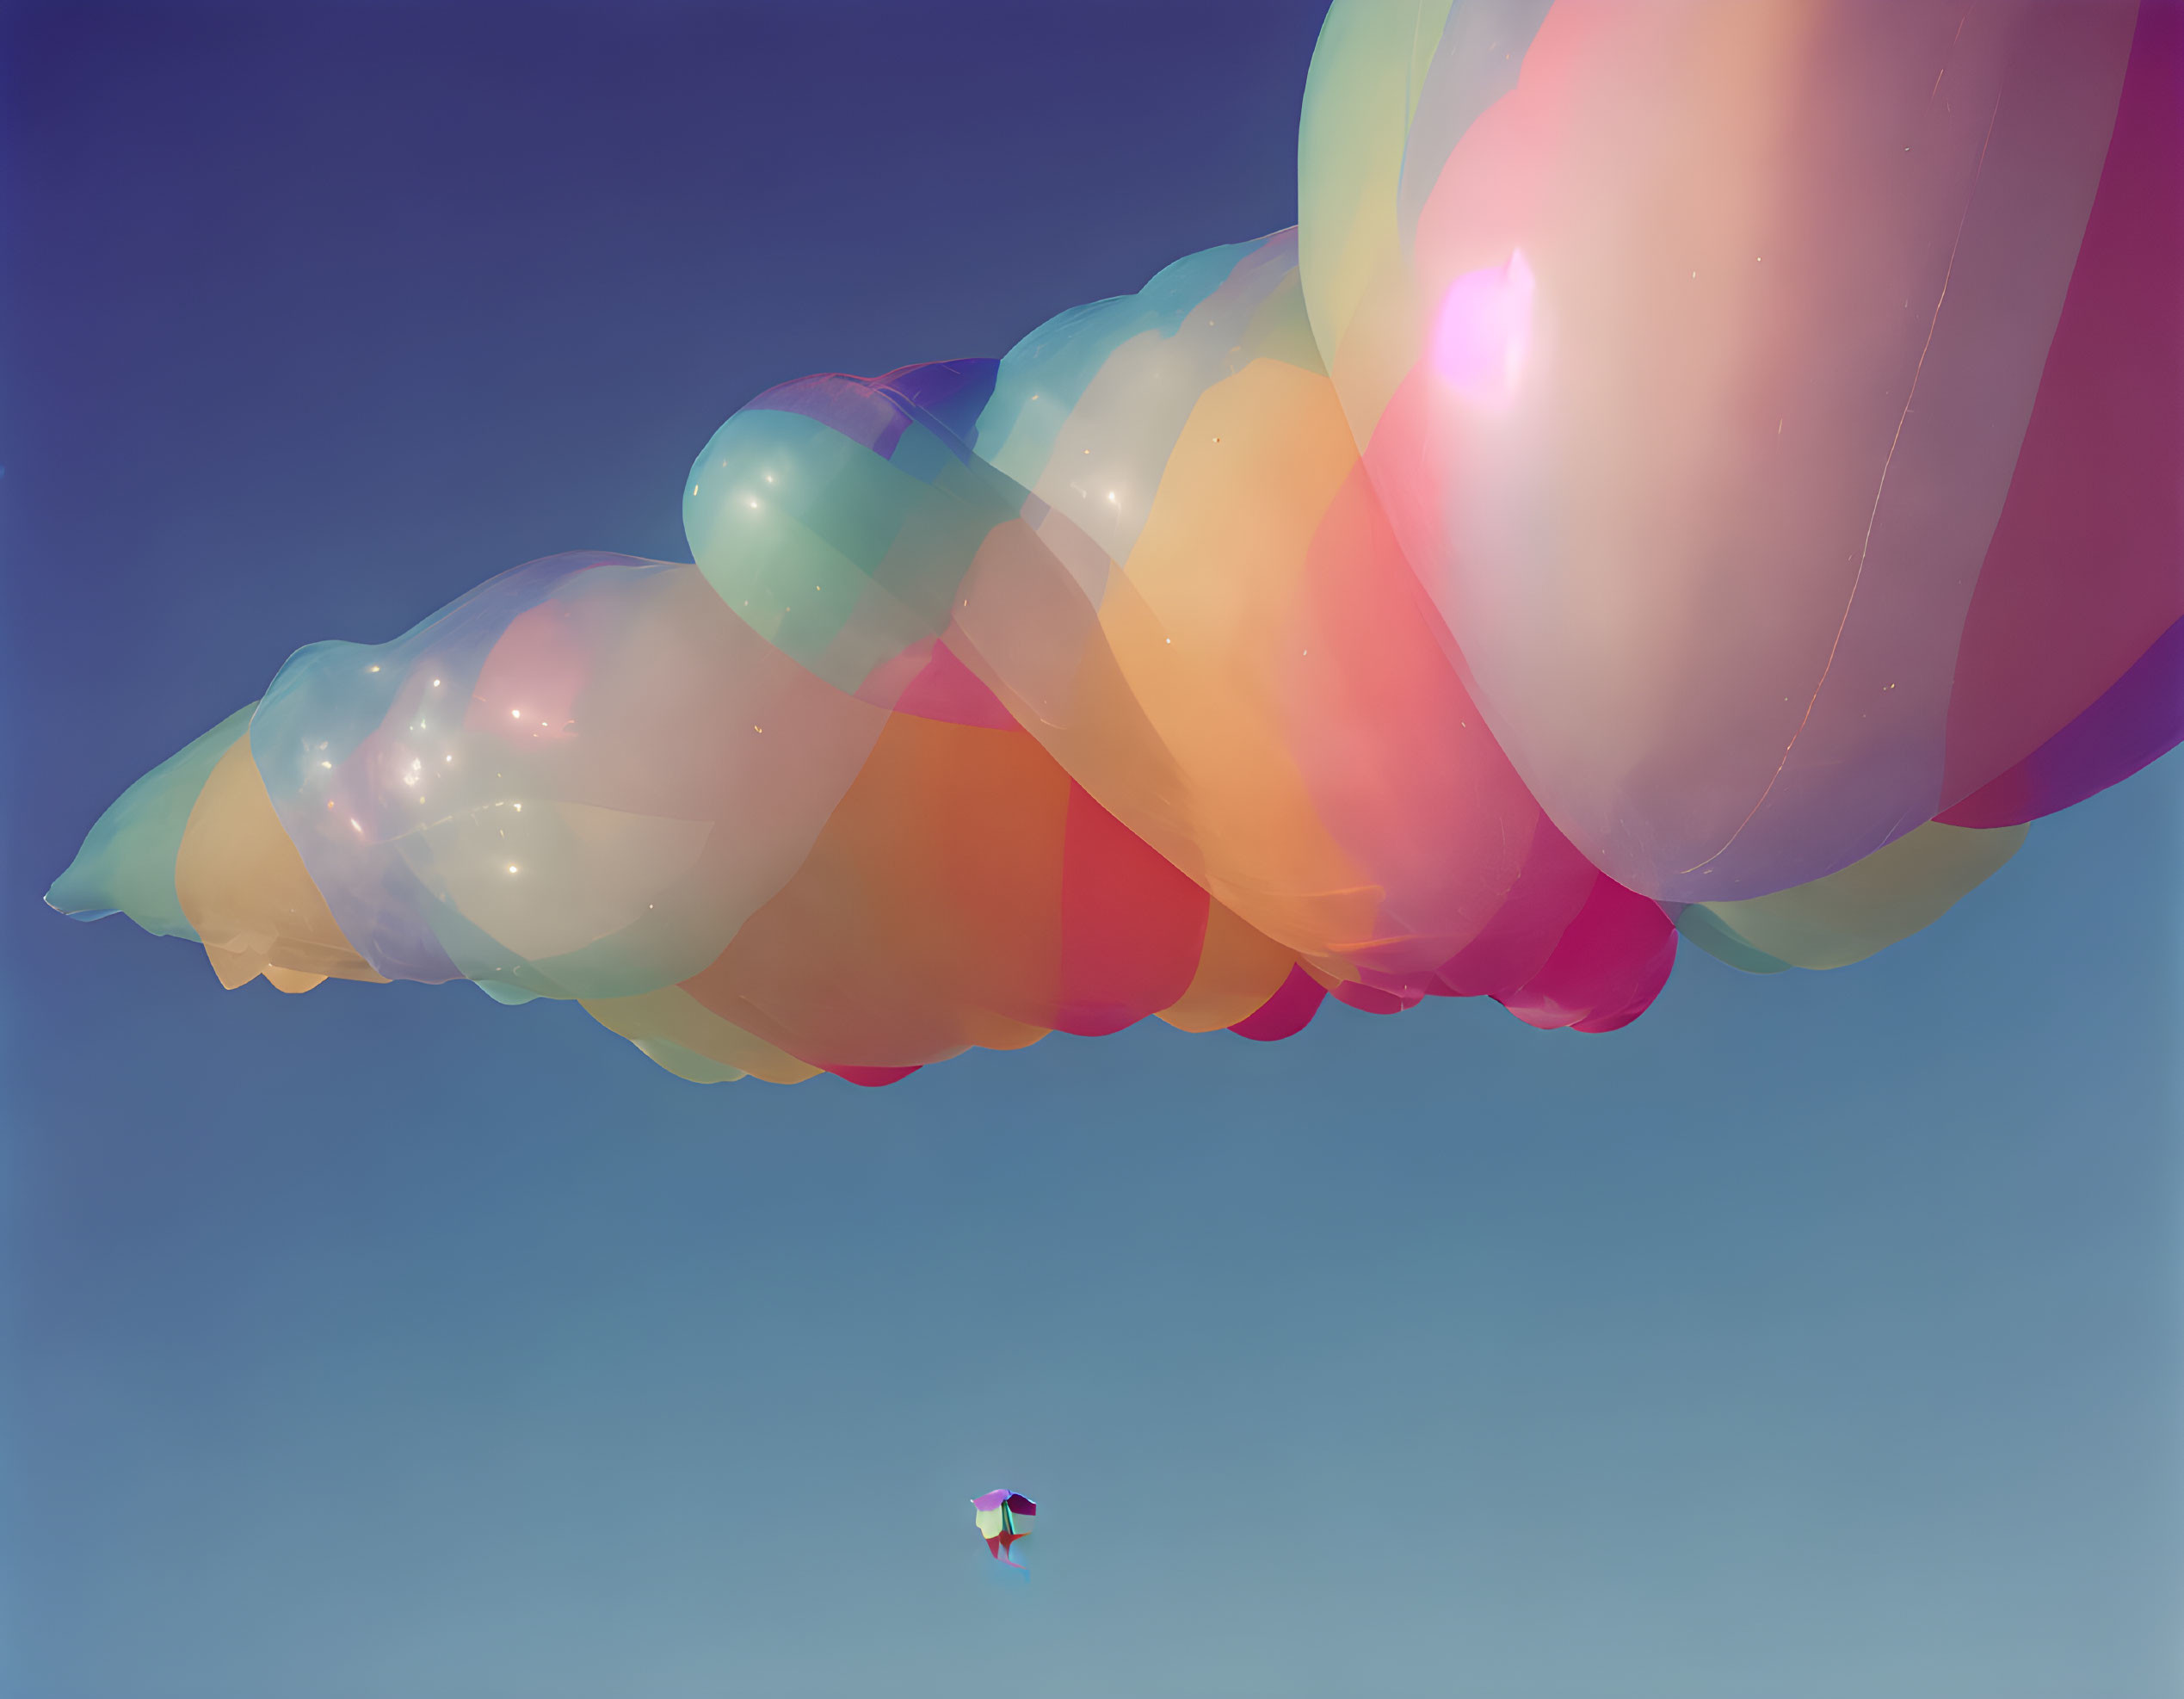 Translucent rainbow-colored balloons in clear blue sky with tiny figure